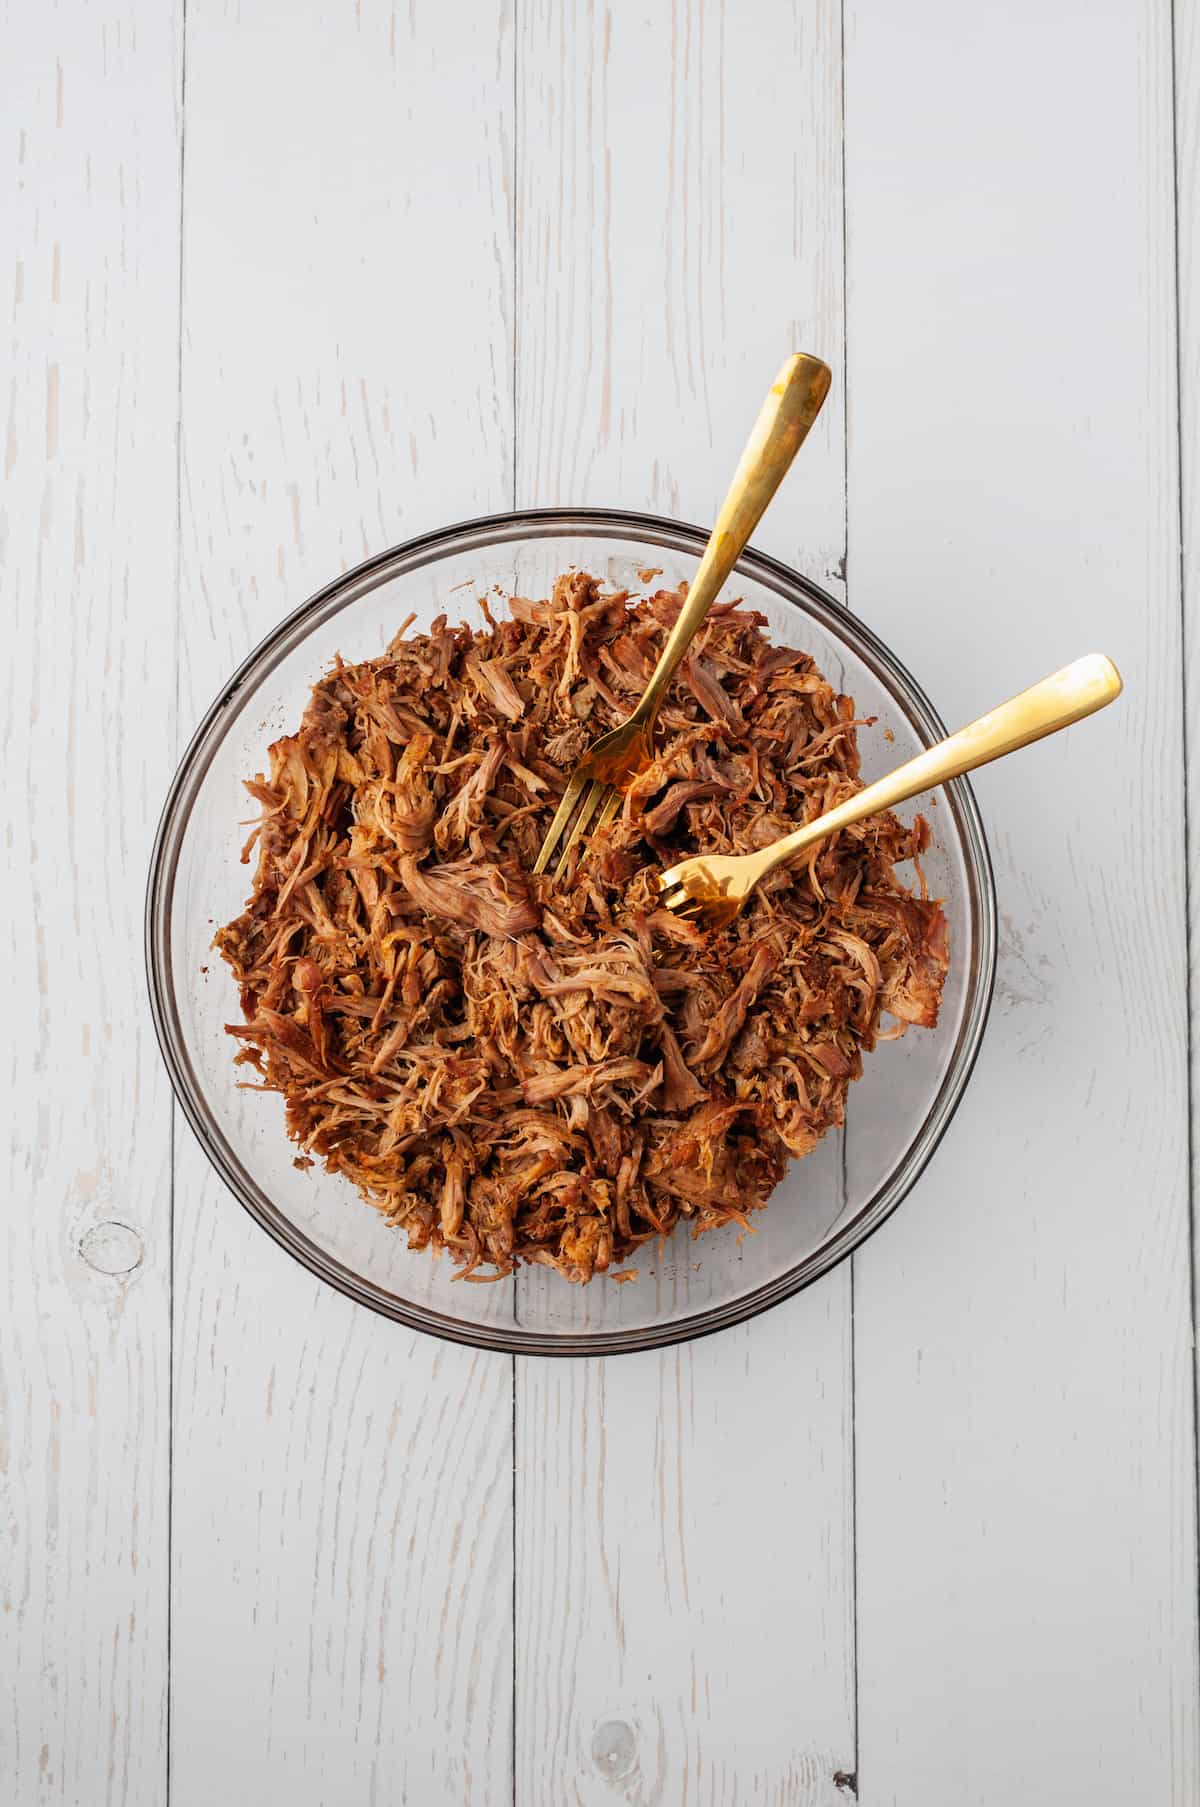 Overhead view showing two forks in bowl of shredded pork